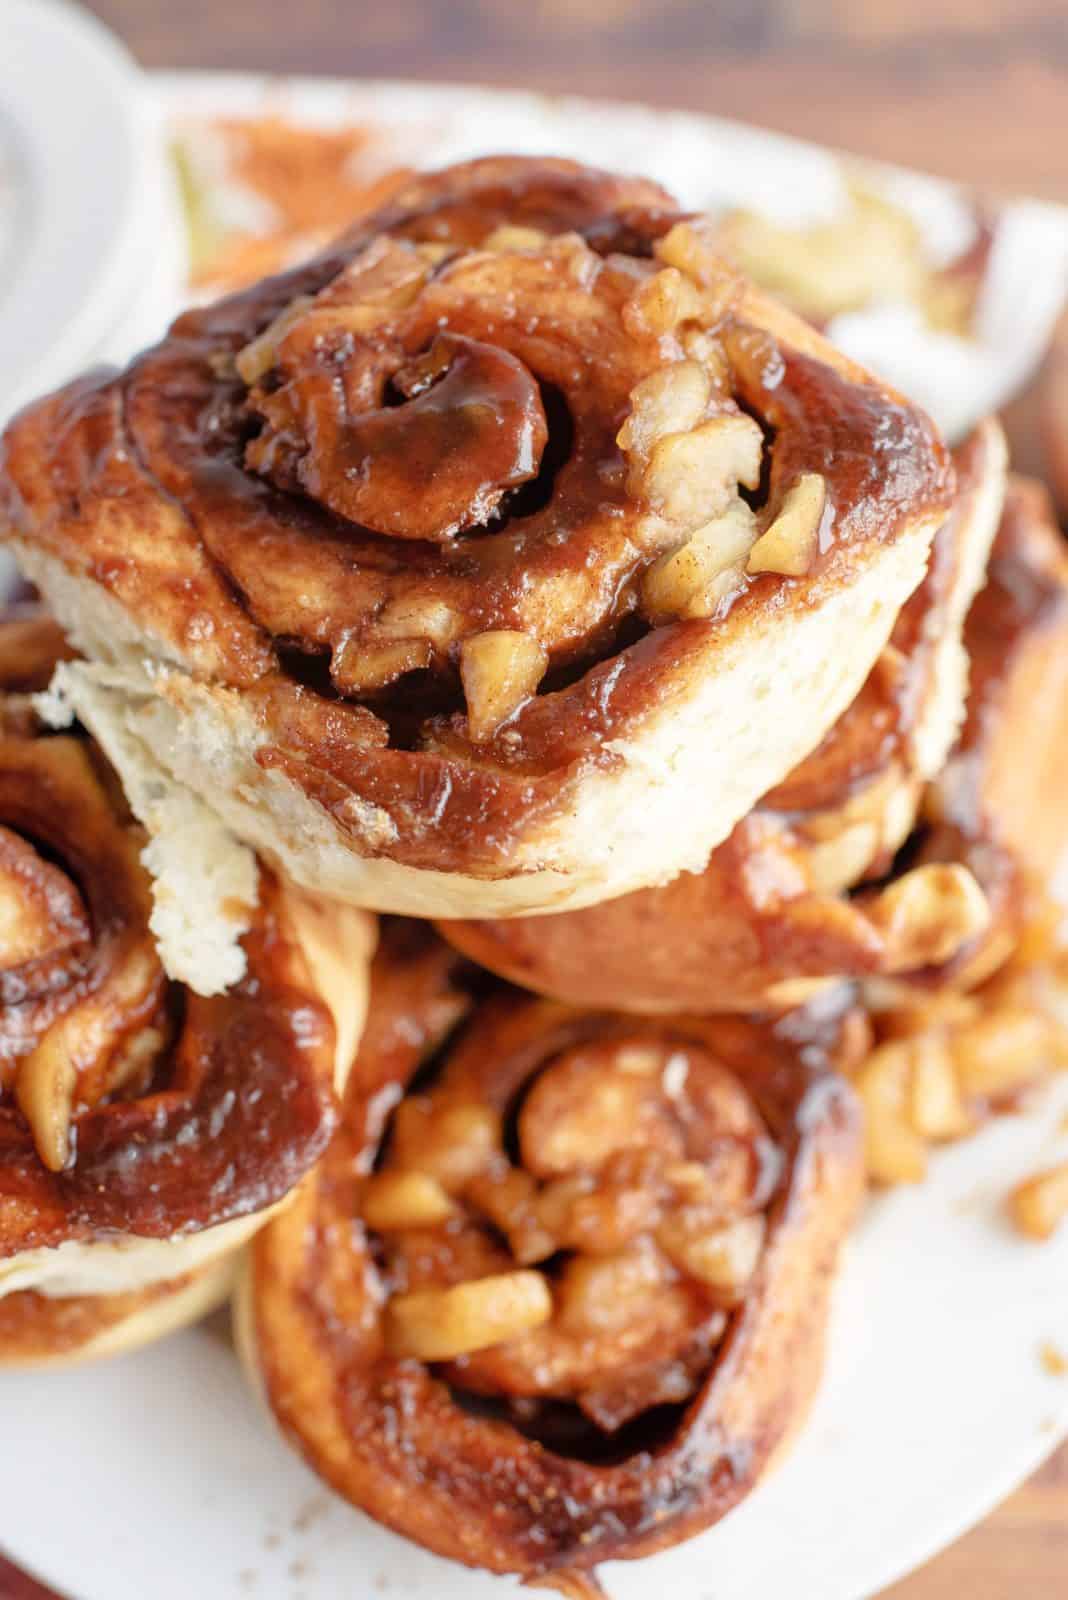 Stacked Apple Cinnamon Buns after baking.